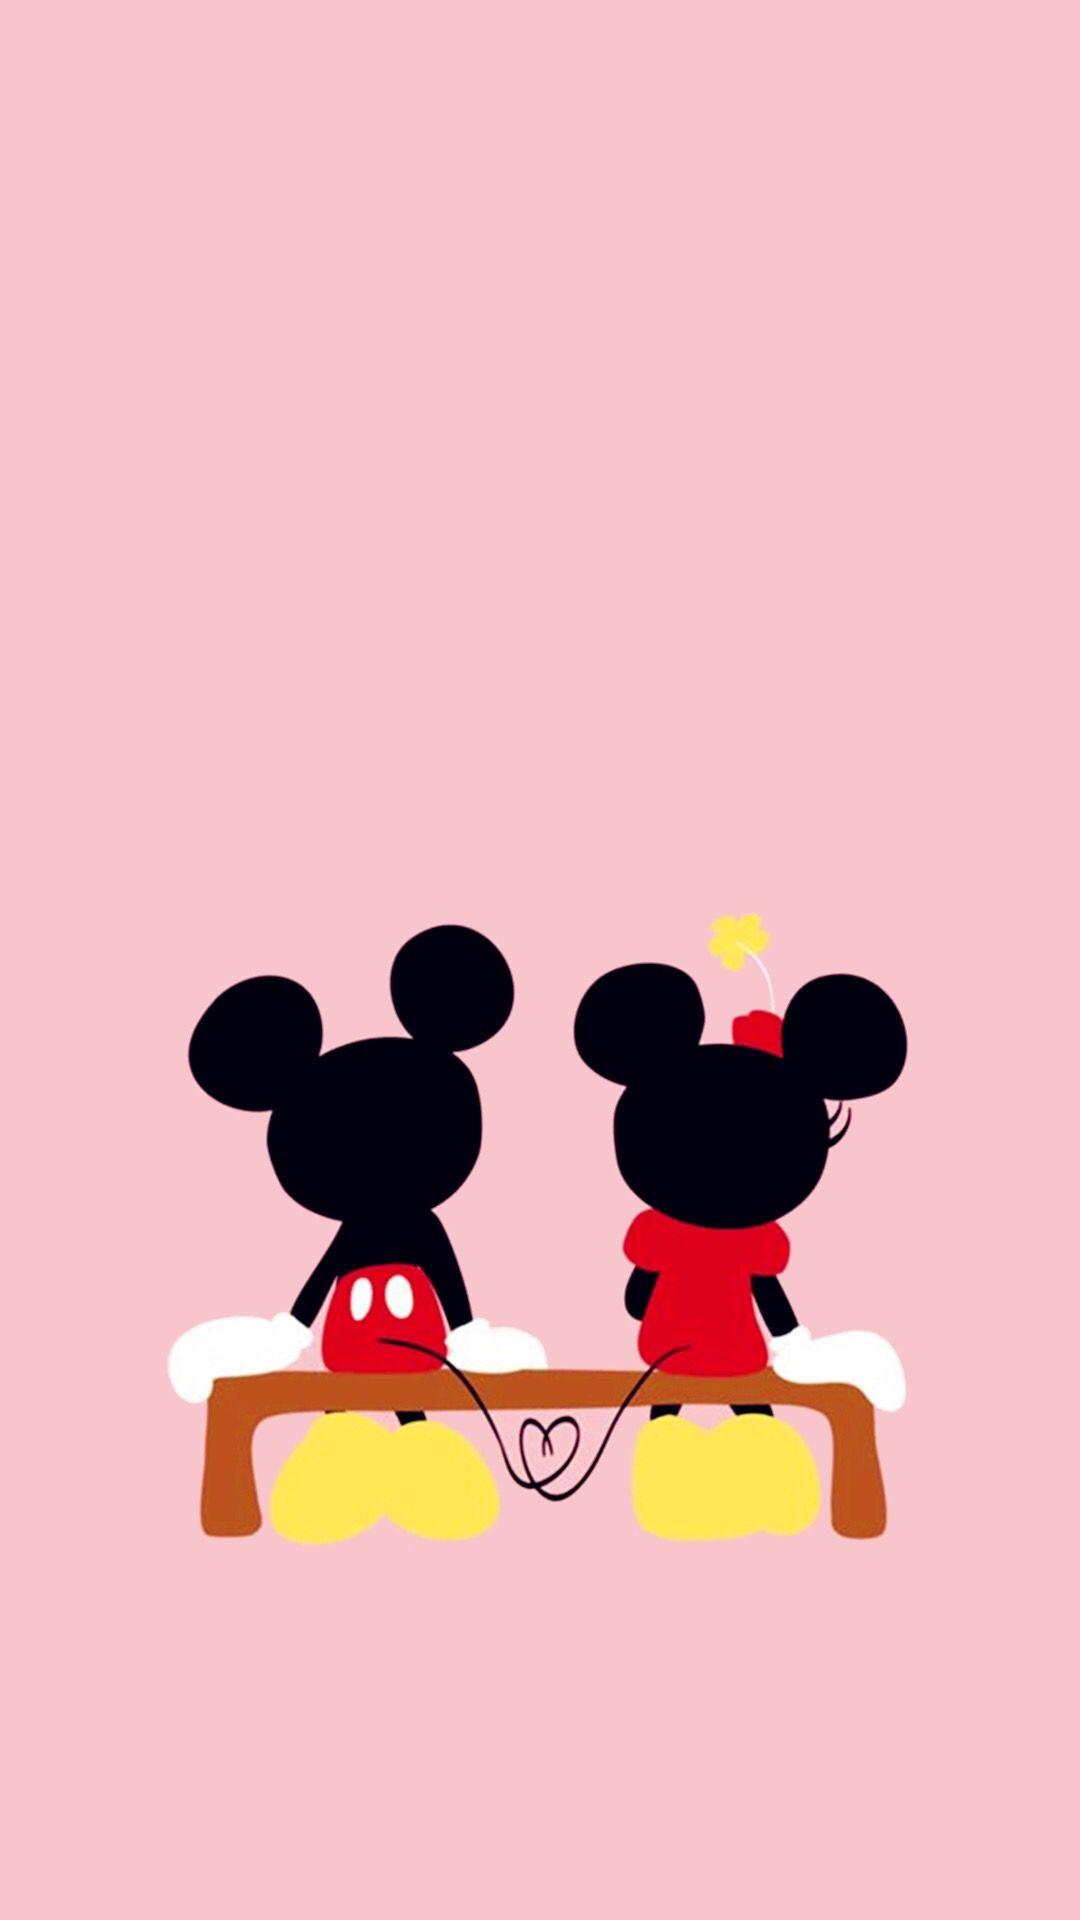 Old school mini  Minnie mouse images, Cute disney wallpaper